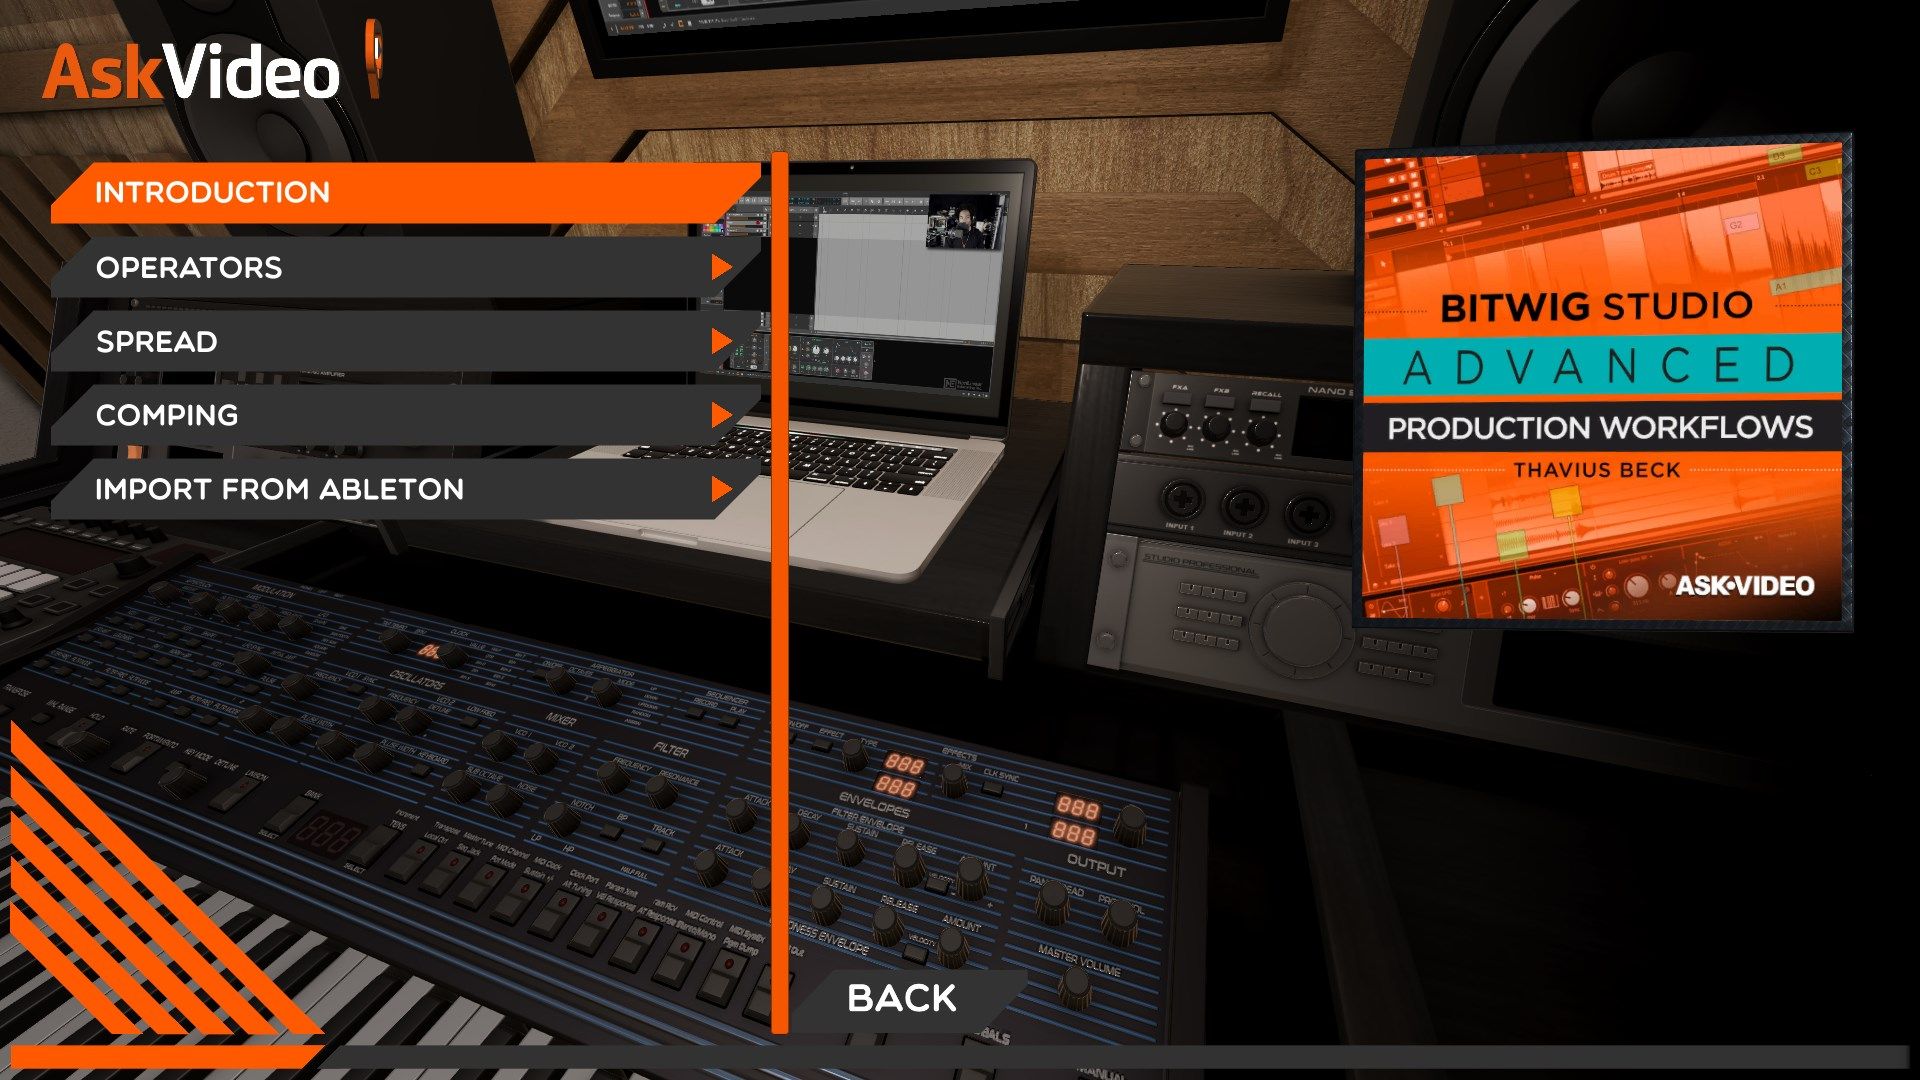 Adv Production Workflows for BitWig Studio